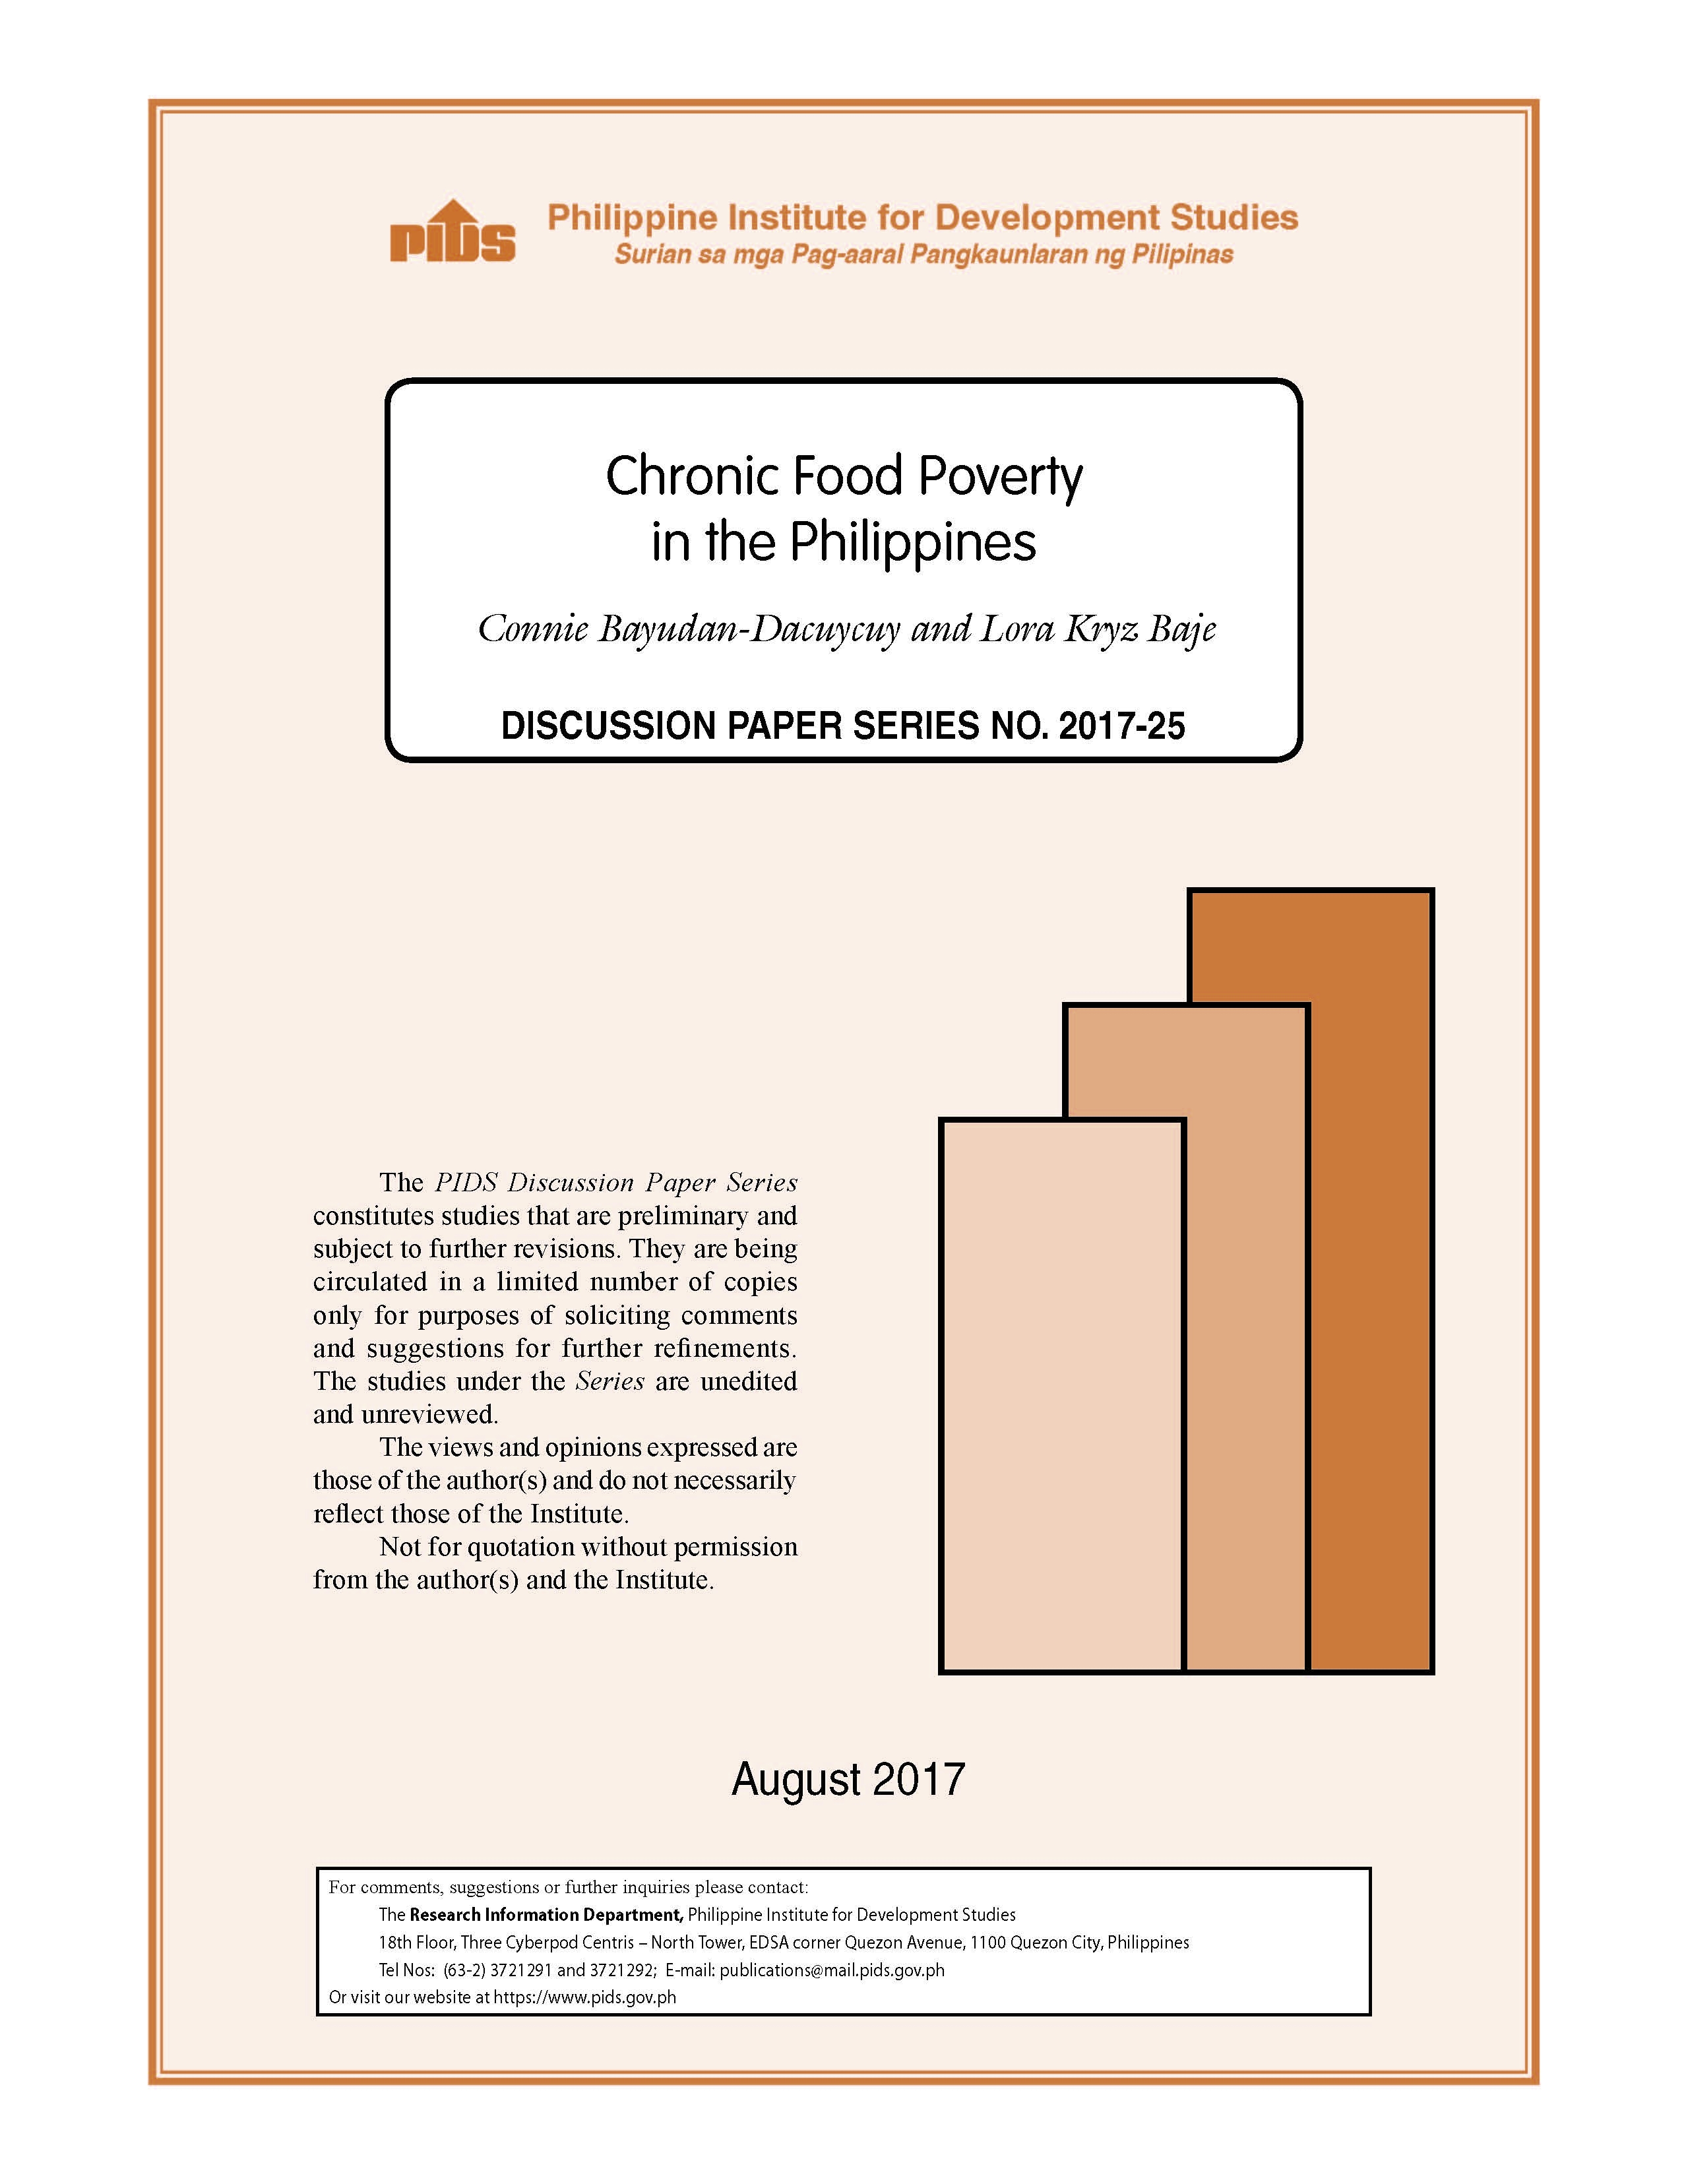 Chronic Food Poverty in the Philippines